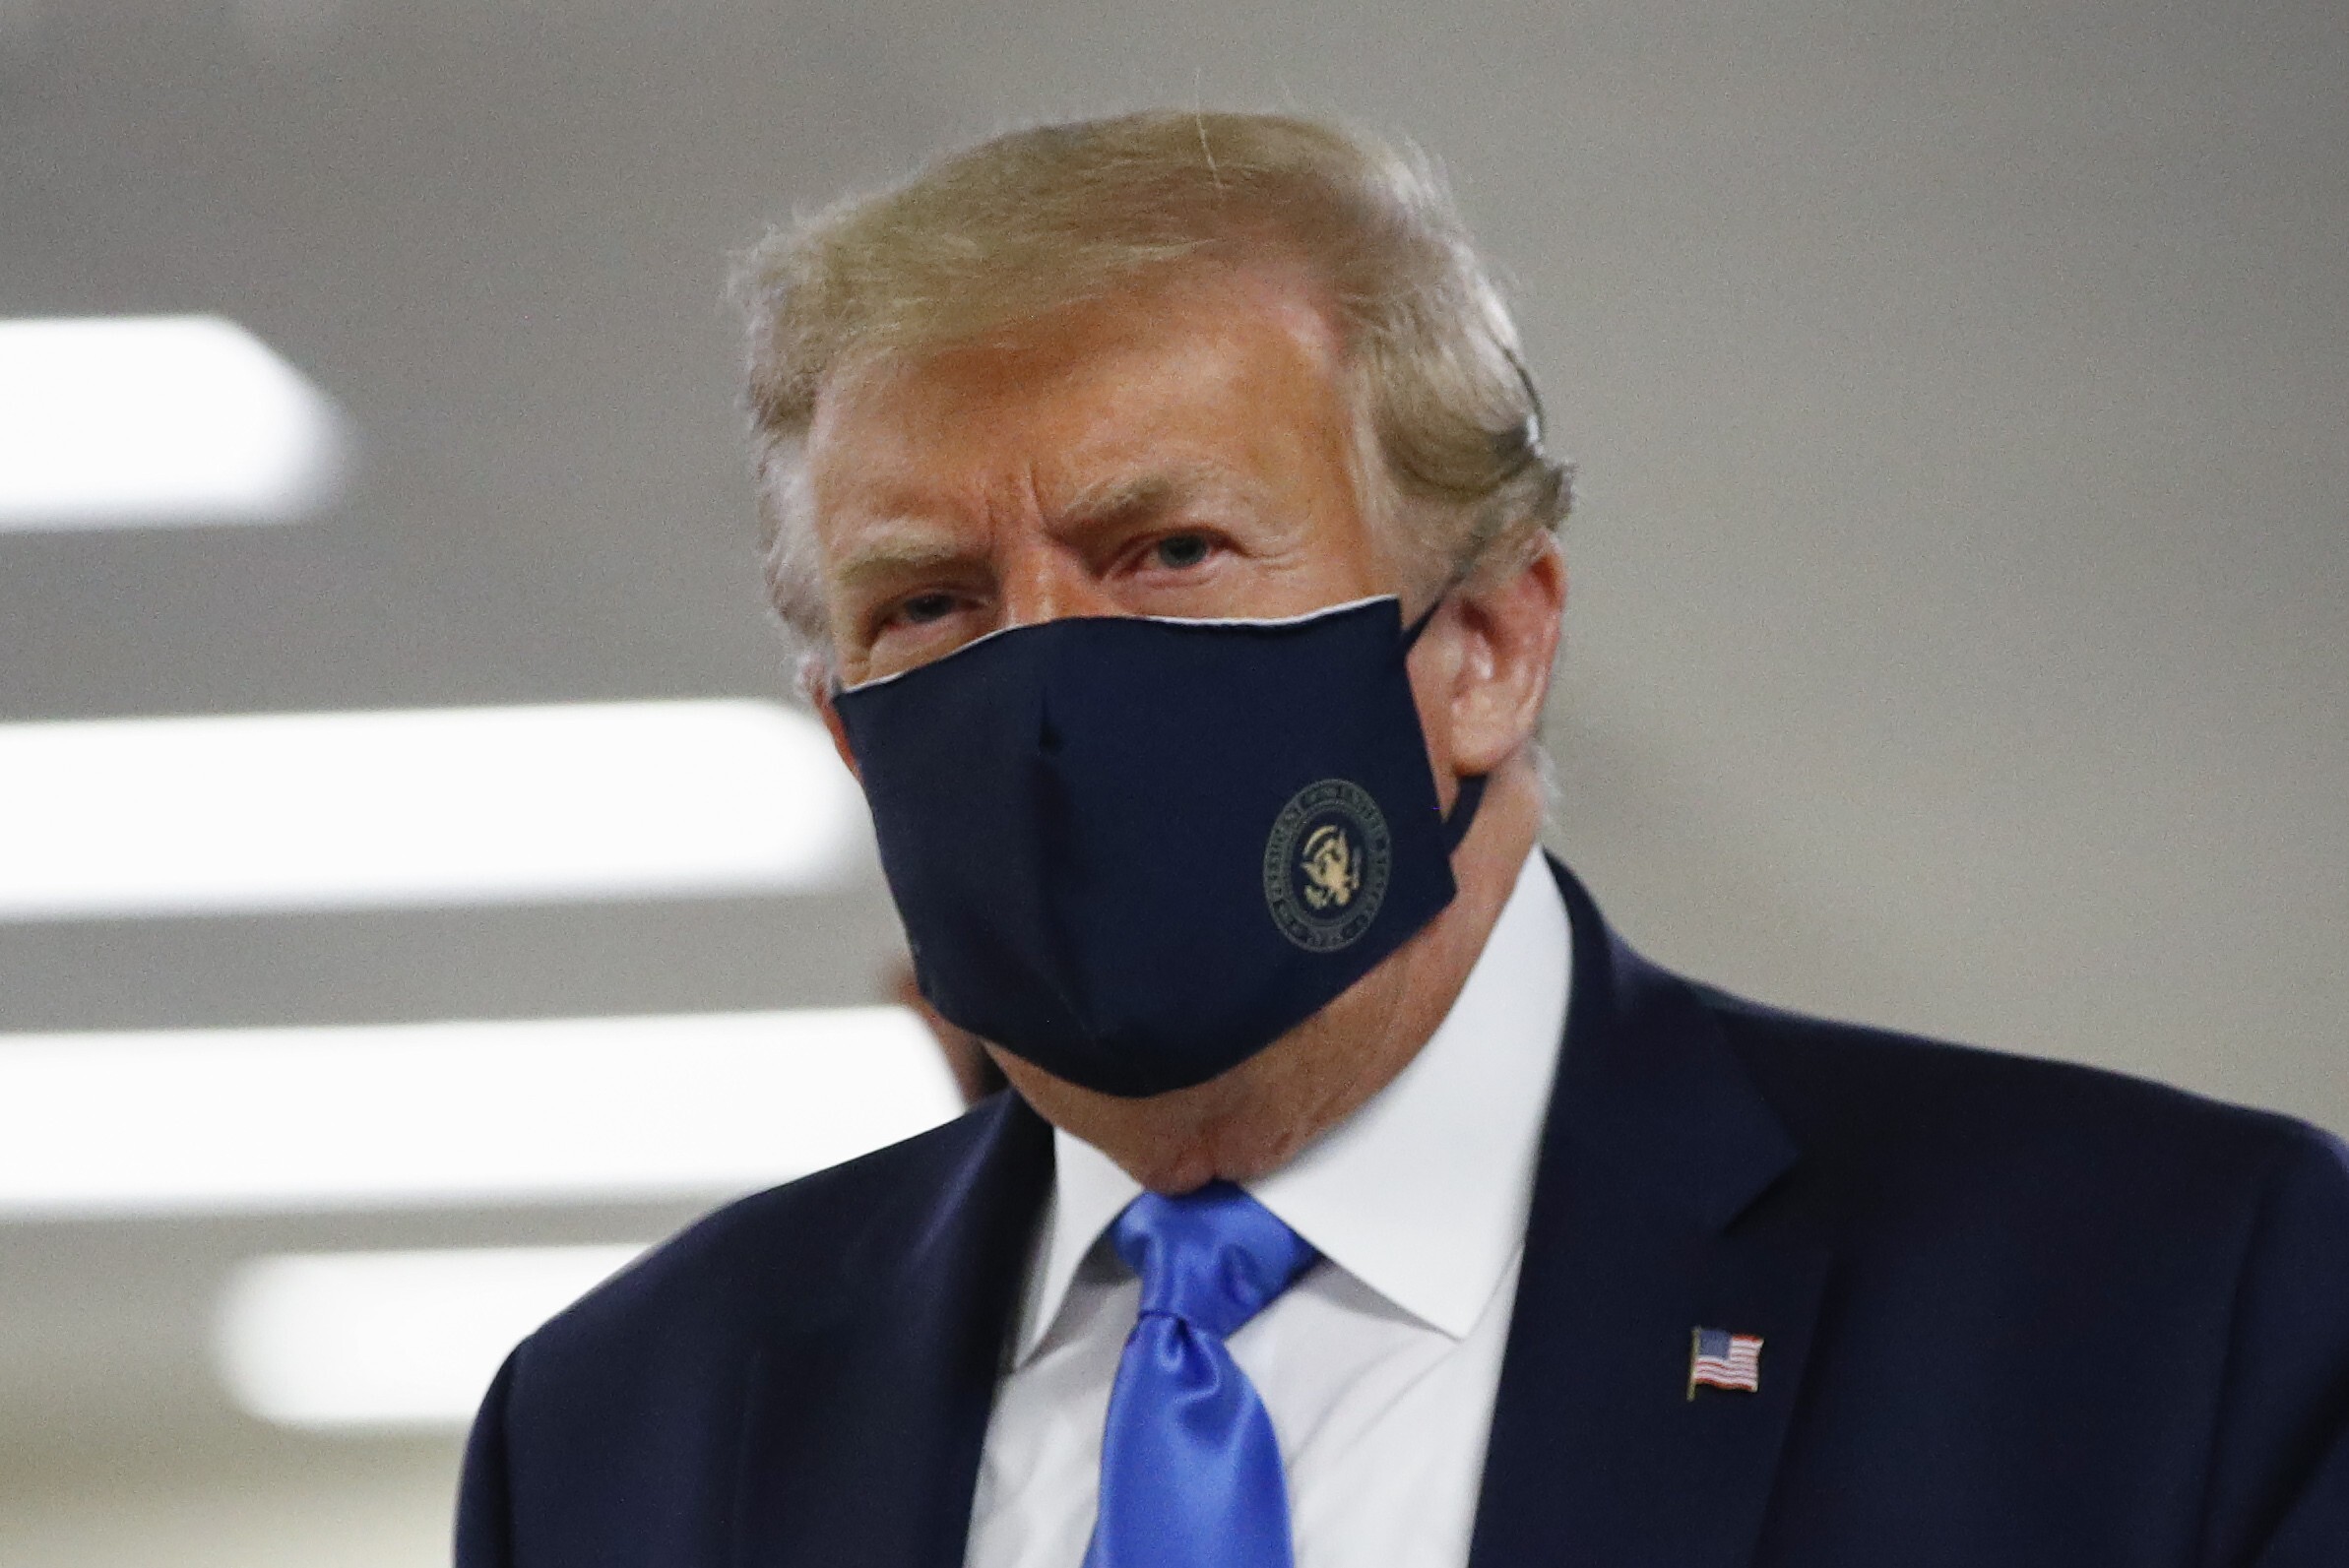 US President Donald Trump wears a face mask during a visit to the Walter Reed National Military Medical Centre in Bethesda, Maryland, on July 11. Trump has recently backtracked and expressed support for wearing masks after months of suggesting that they were a political statement against him. Photo: AP